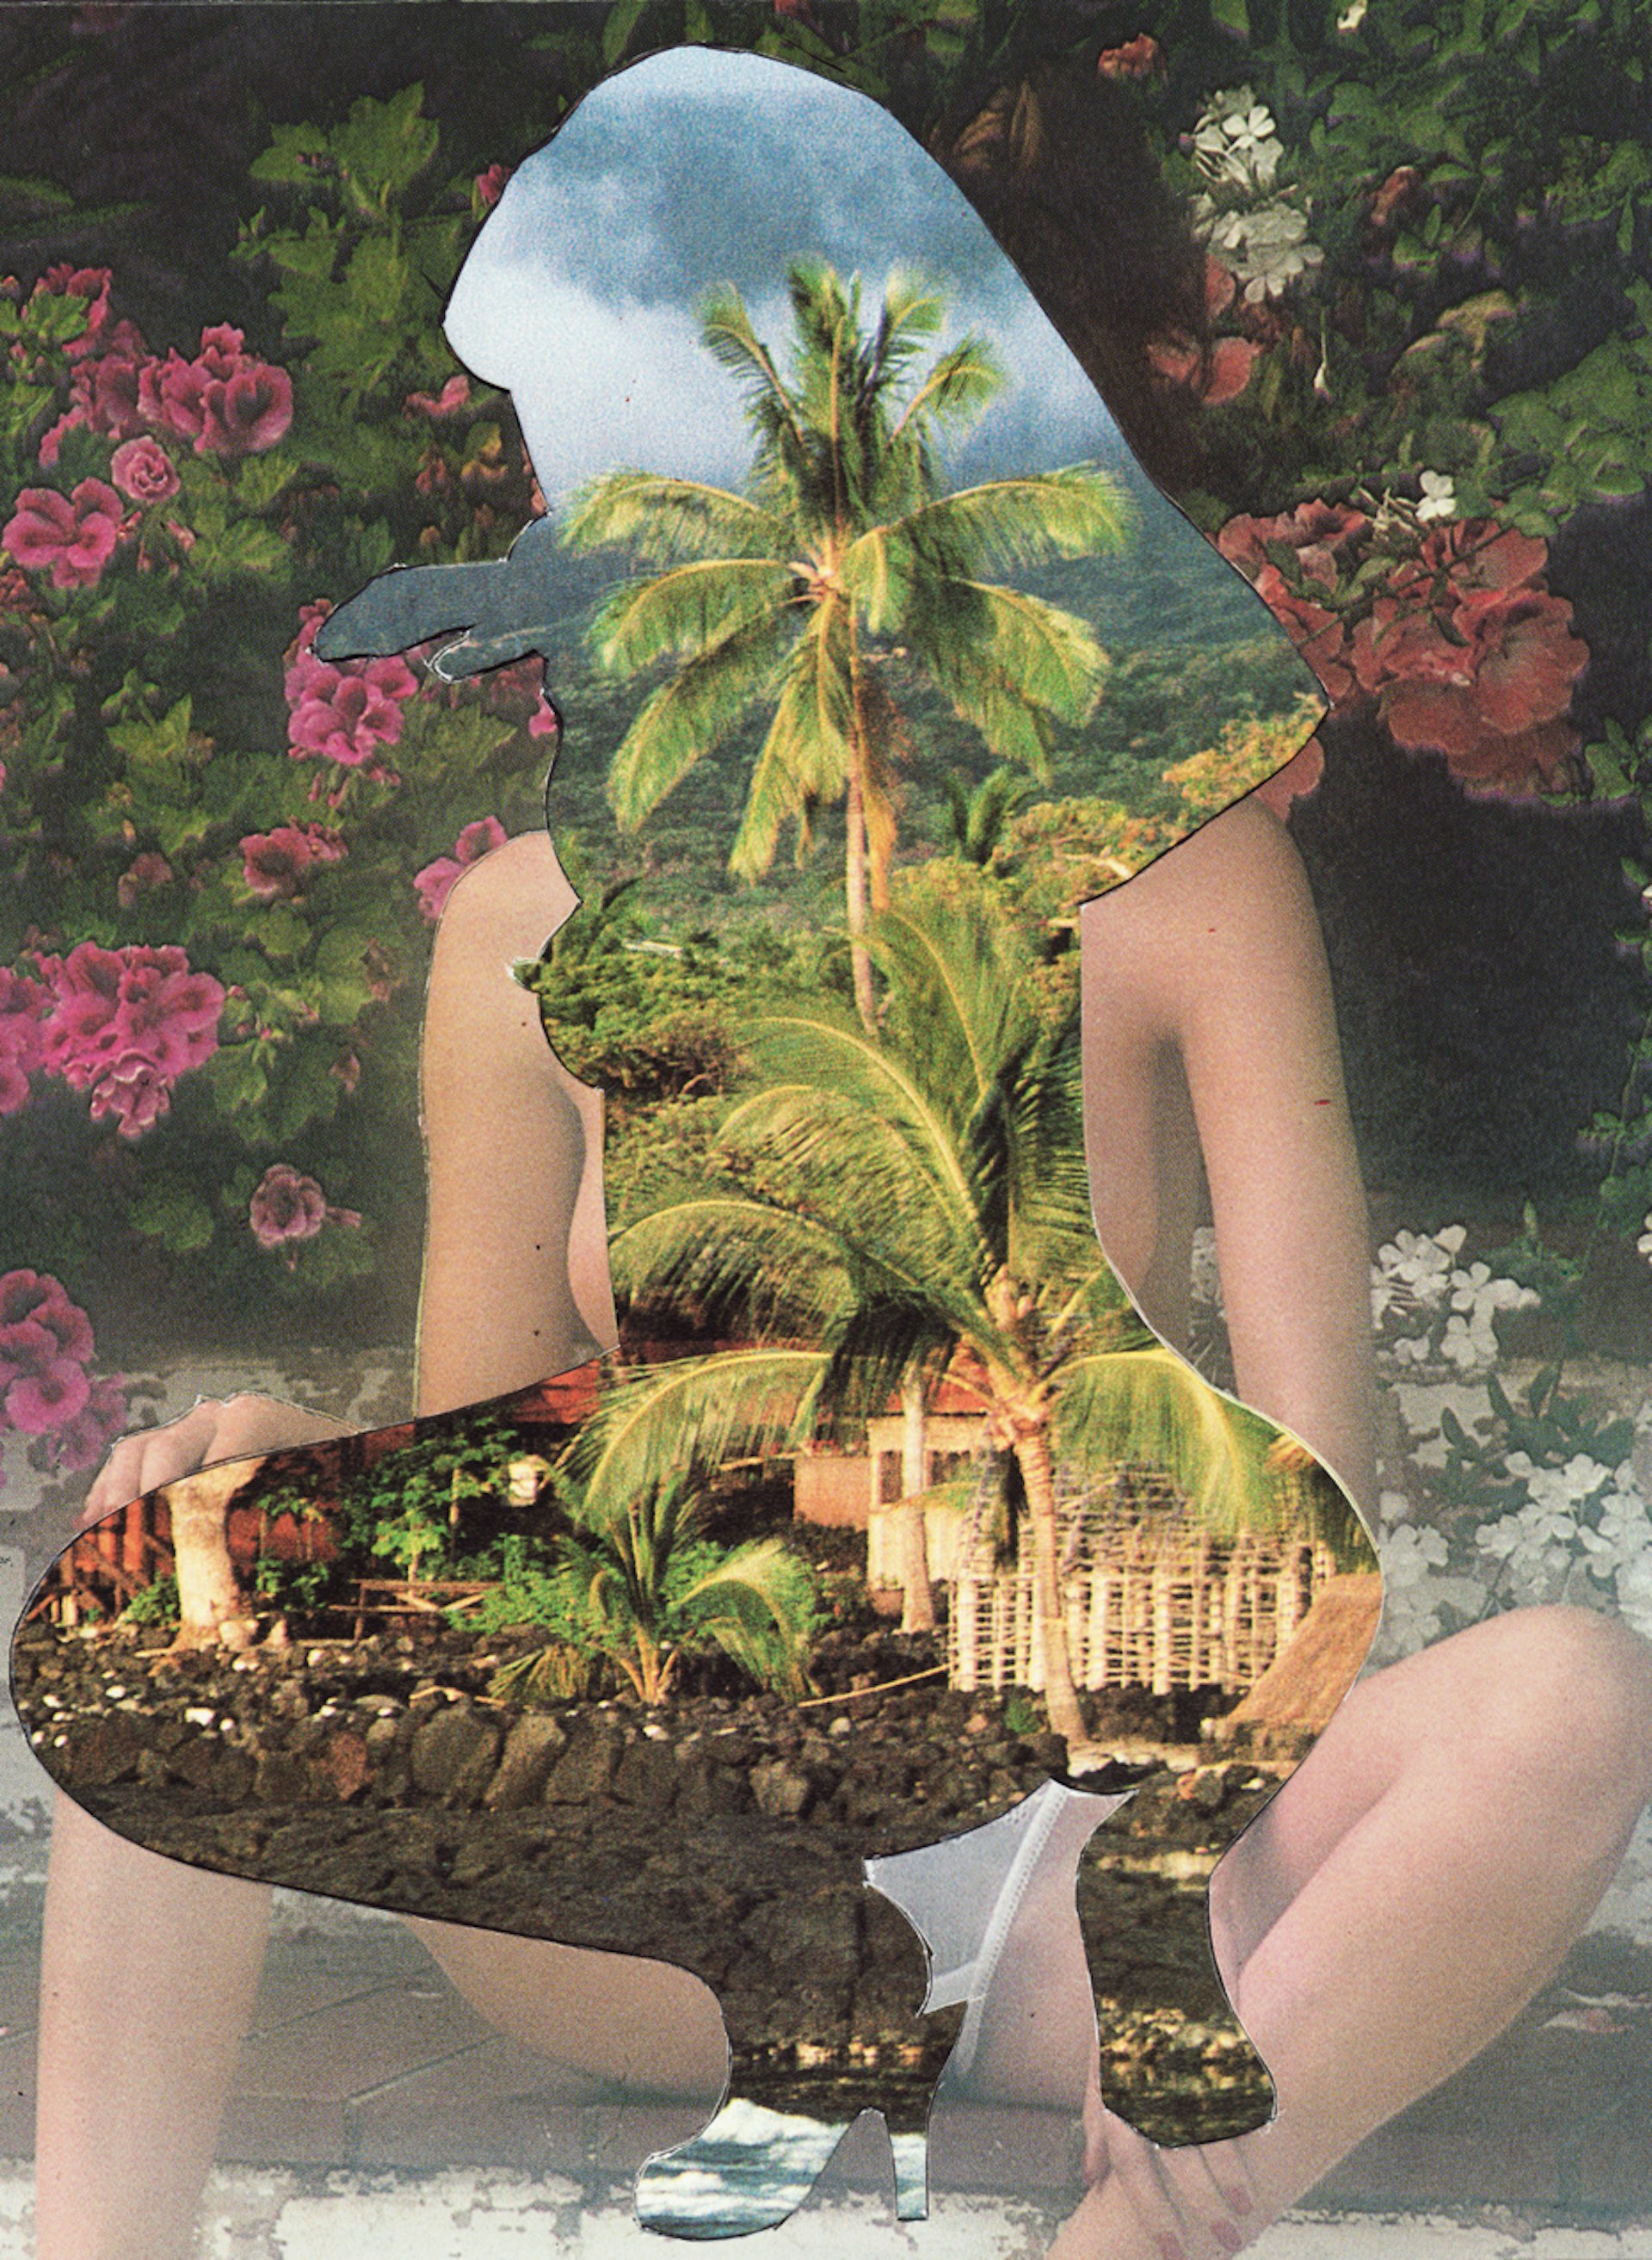 DR.ME: 009 from ‘365 Days of Collage’ project. Handmade collage, 2014